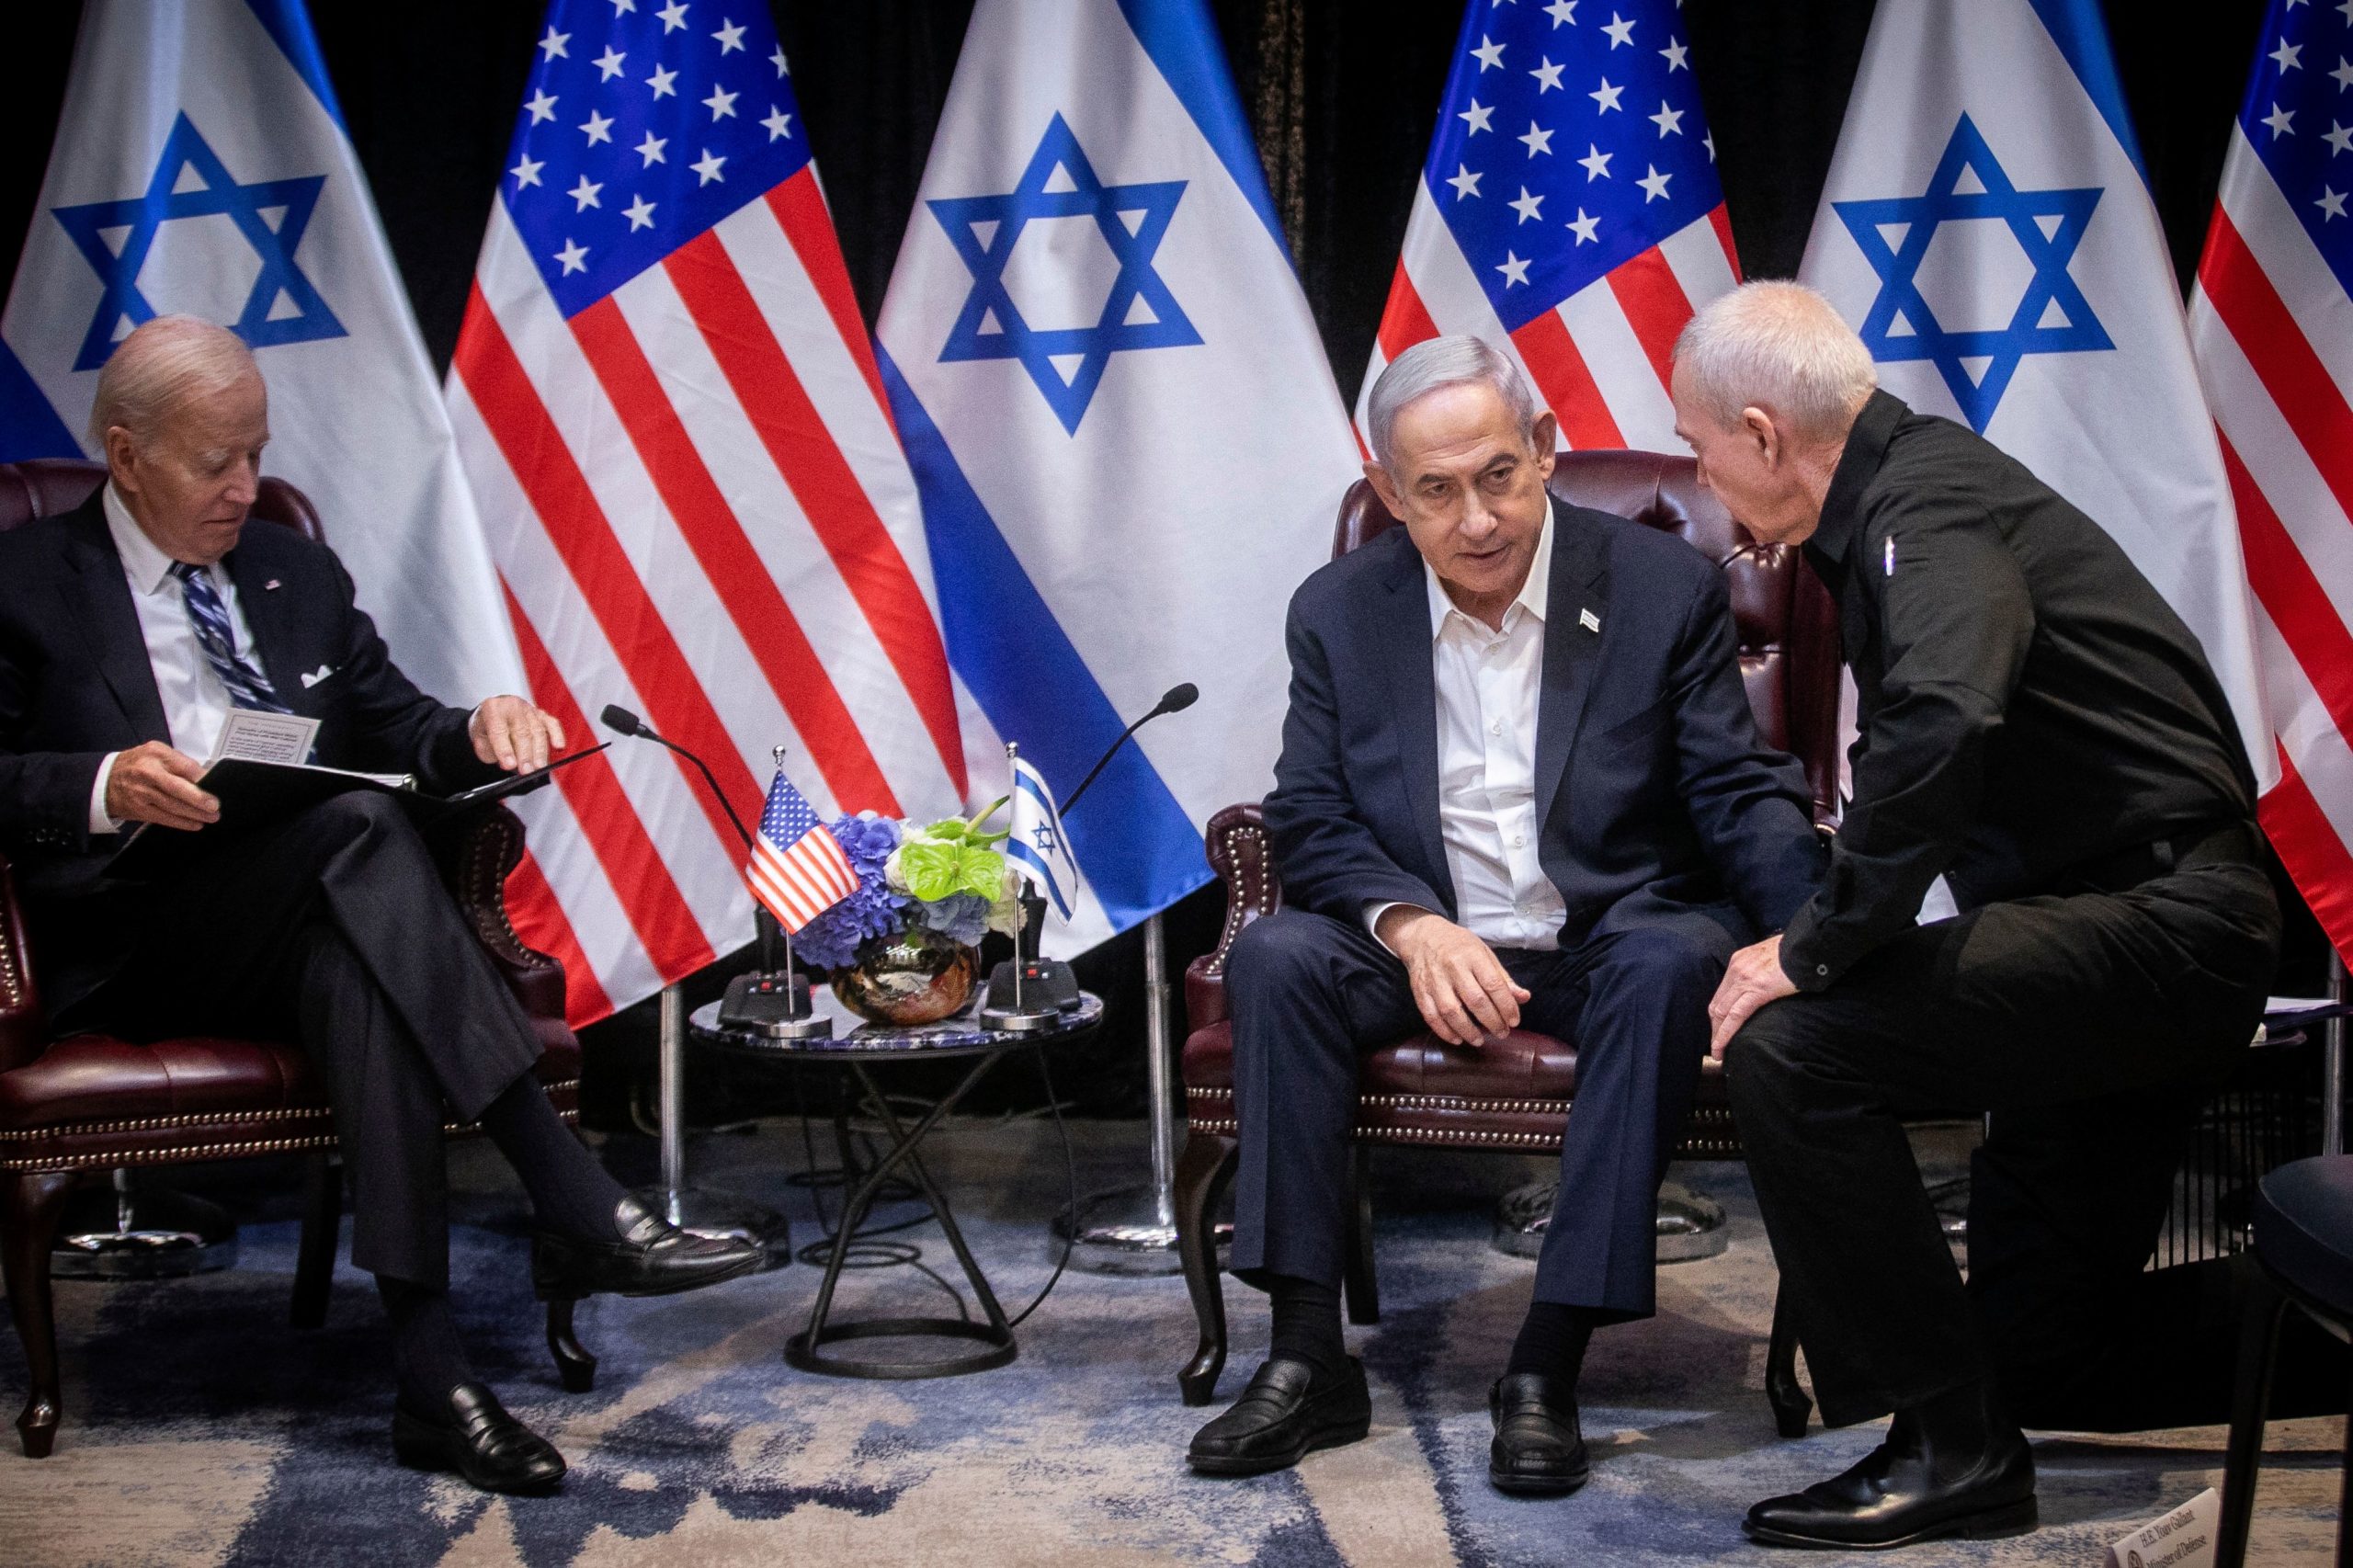 Israeli Prime Minister Benjamin Netanyahu (2nR), confers with Defense Minister Yoav Gallant (R), during their meeting with US President Joe Biden (L) at the start of the Israeli war cabinet meeting, in Tel Aviv on October 18, 2023, amid the ongoing battles between Israel and the Palestinian group Hamas. US President Joe Biden landed in Tel Aviv on October 18, 2023 as Middle East anger flared after hundreds were killed when a rocket struck a hospital in war-torn Gaza, with Israel and the Palestinians quick to trade blame. (Photo by Miriam Alster / POOL / AFP) (Photo by MIRIAM ALSTER/POOL/AFP via Getty Images)